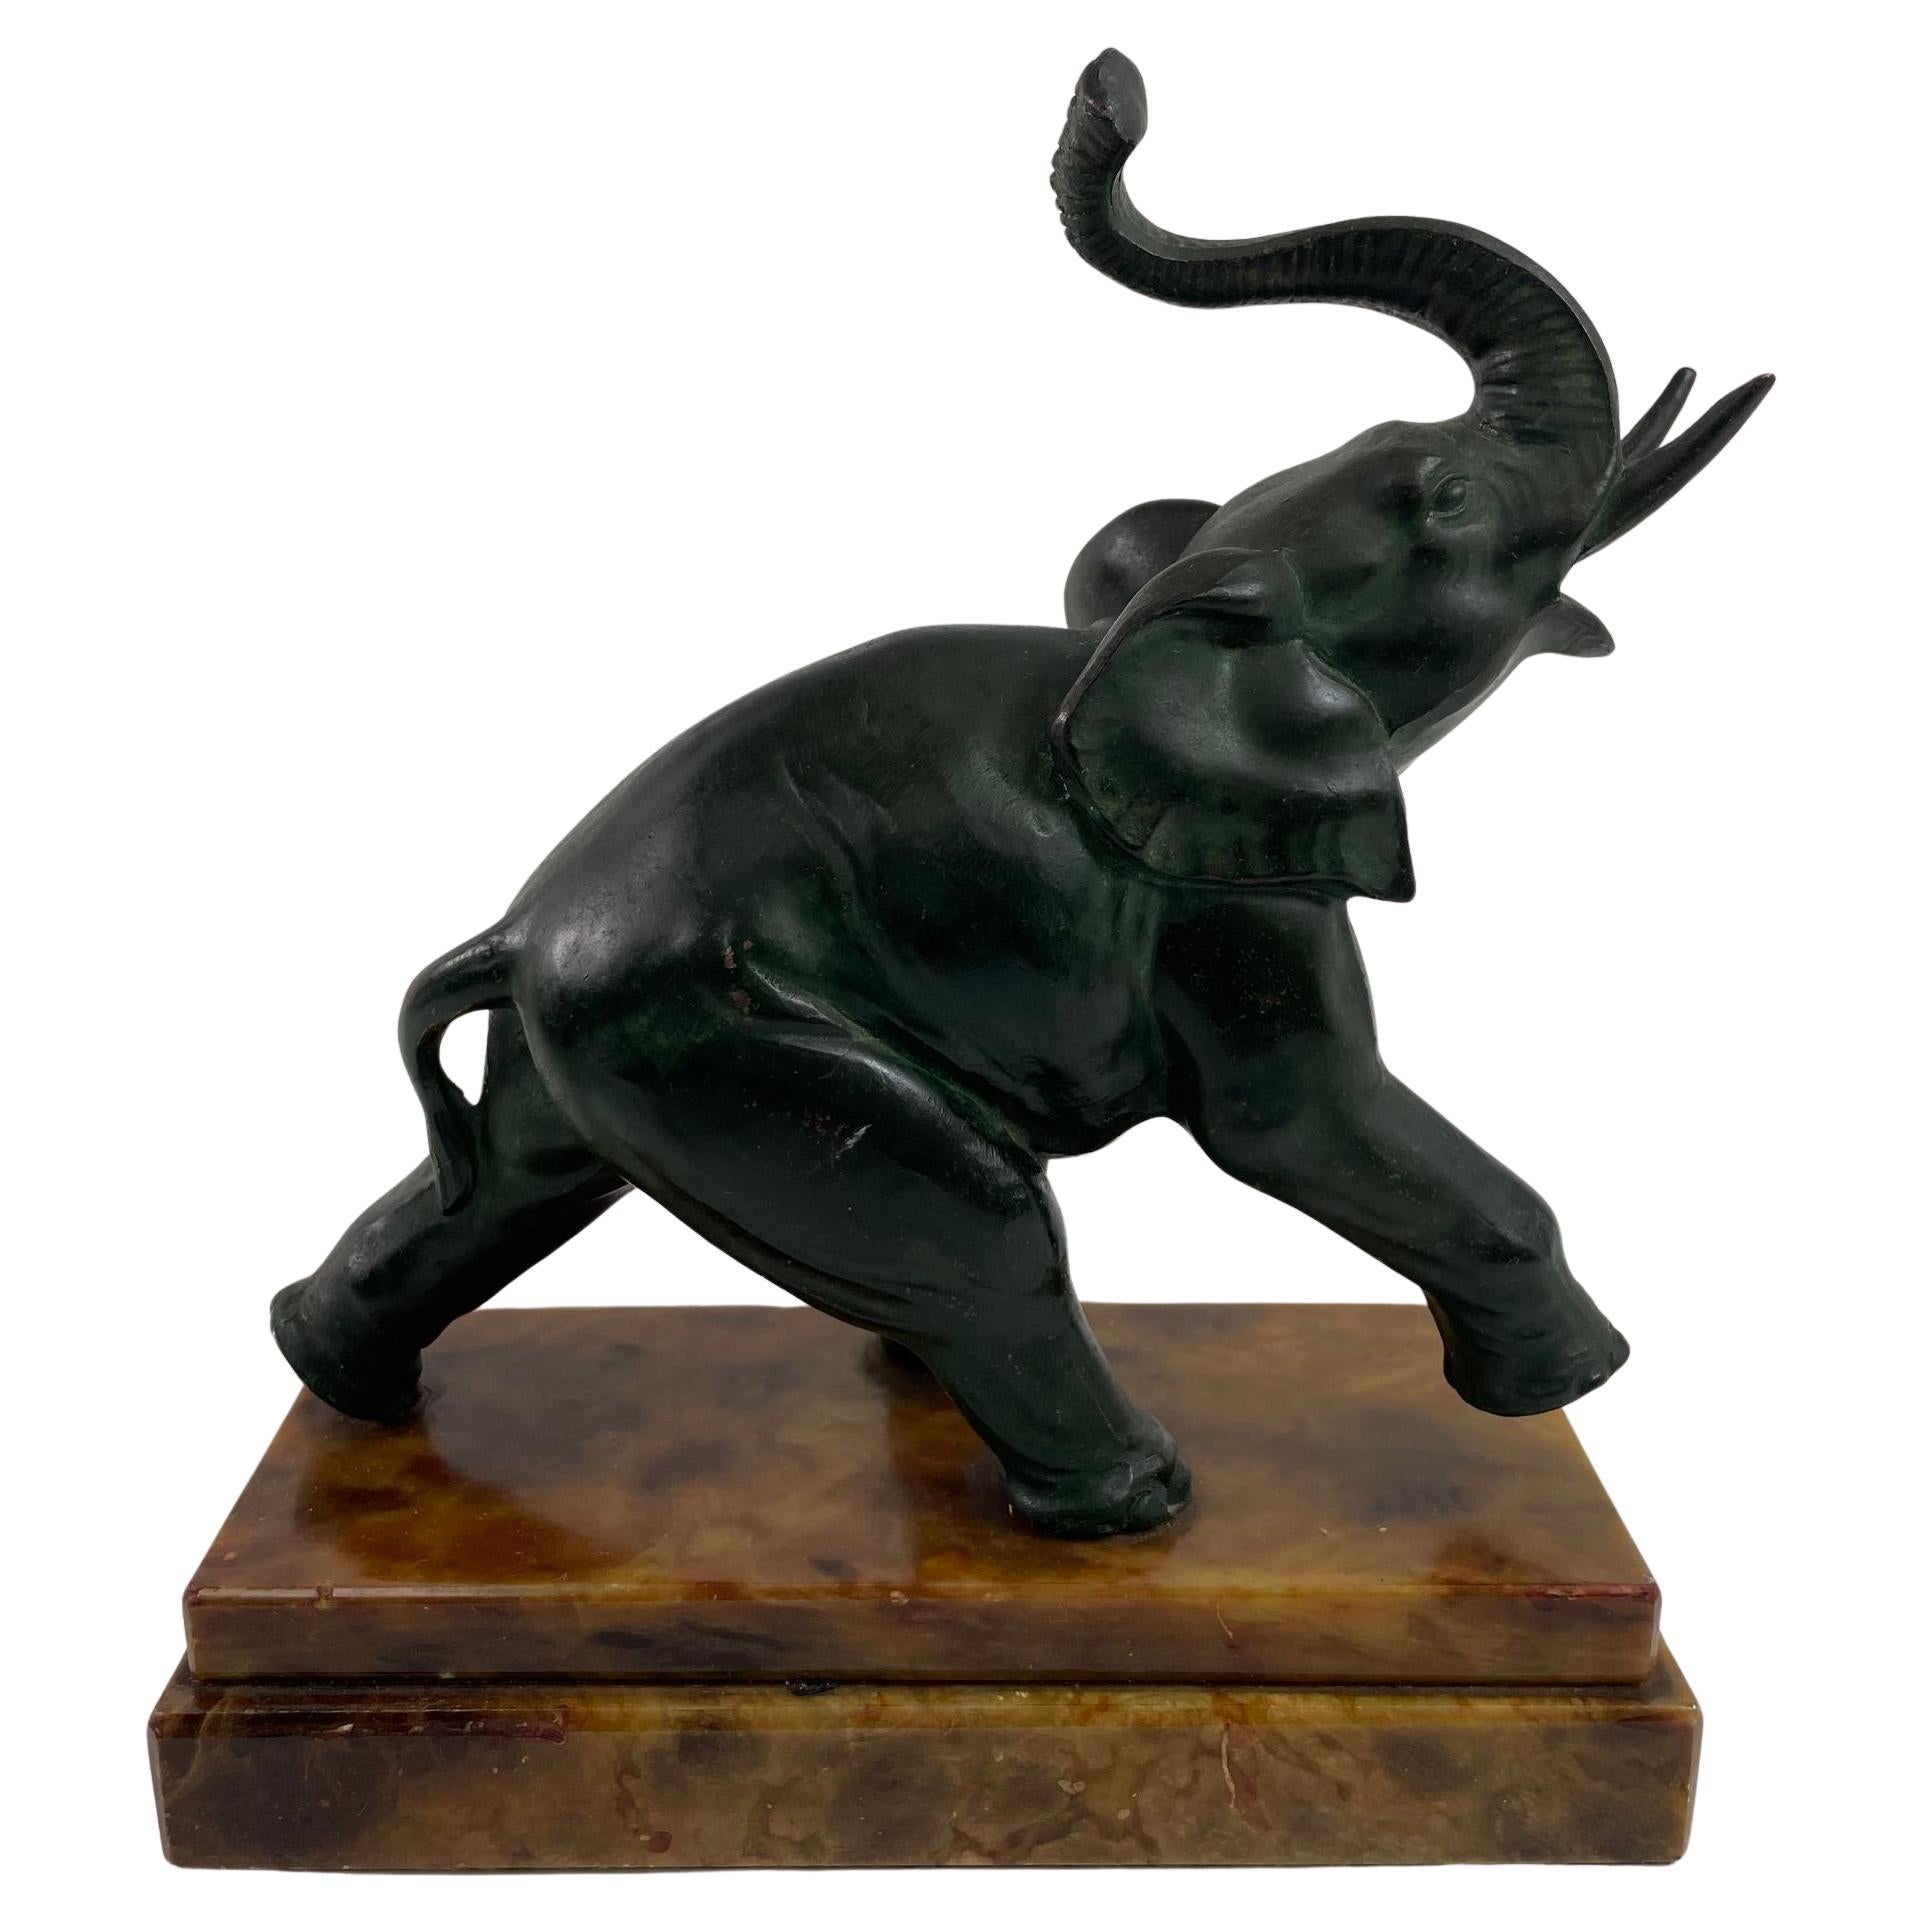 Art Deco Bronze Elephant Sculpture with Raised Trunk Made in Italy